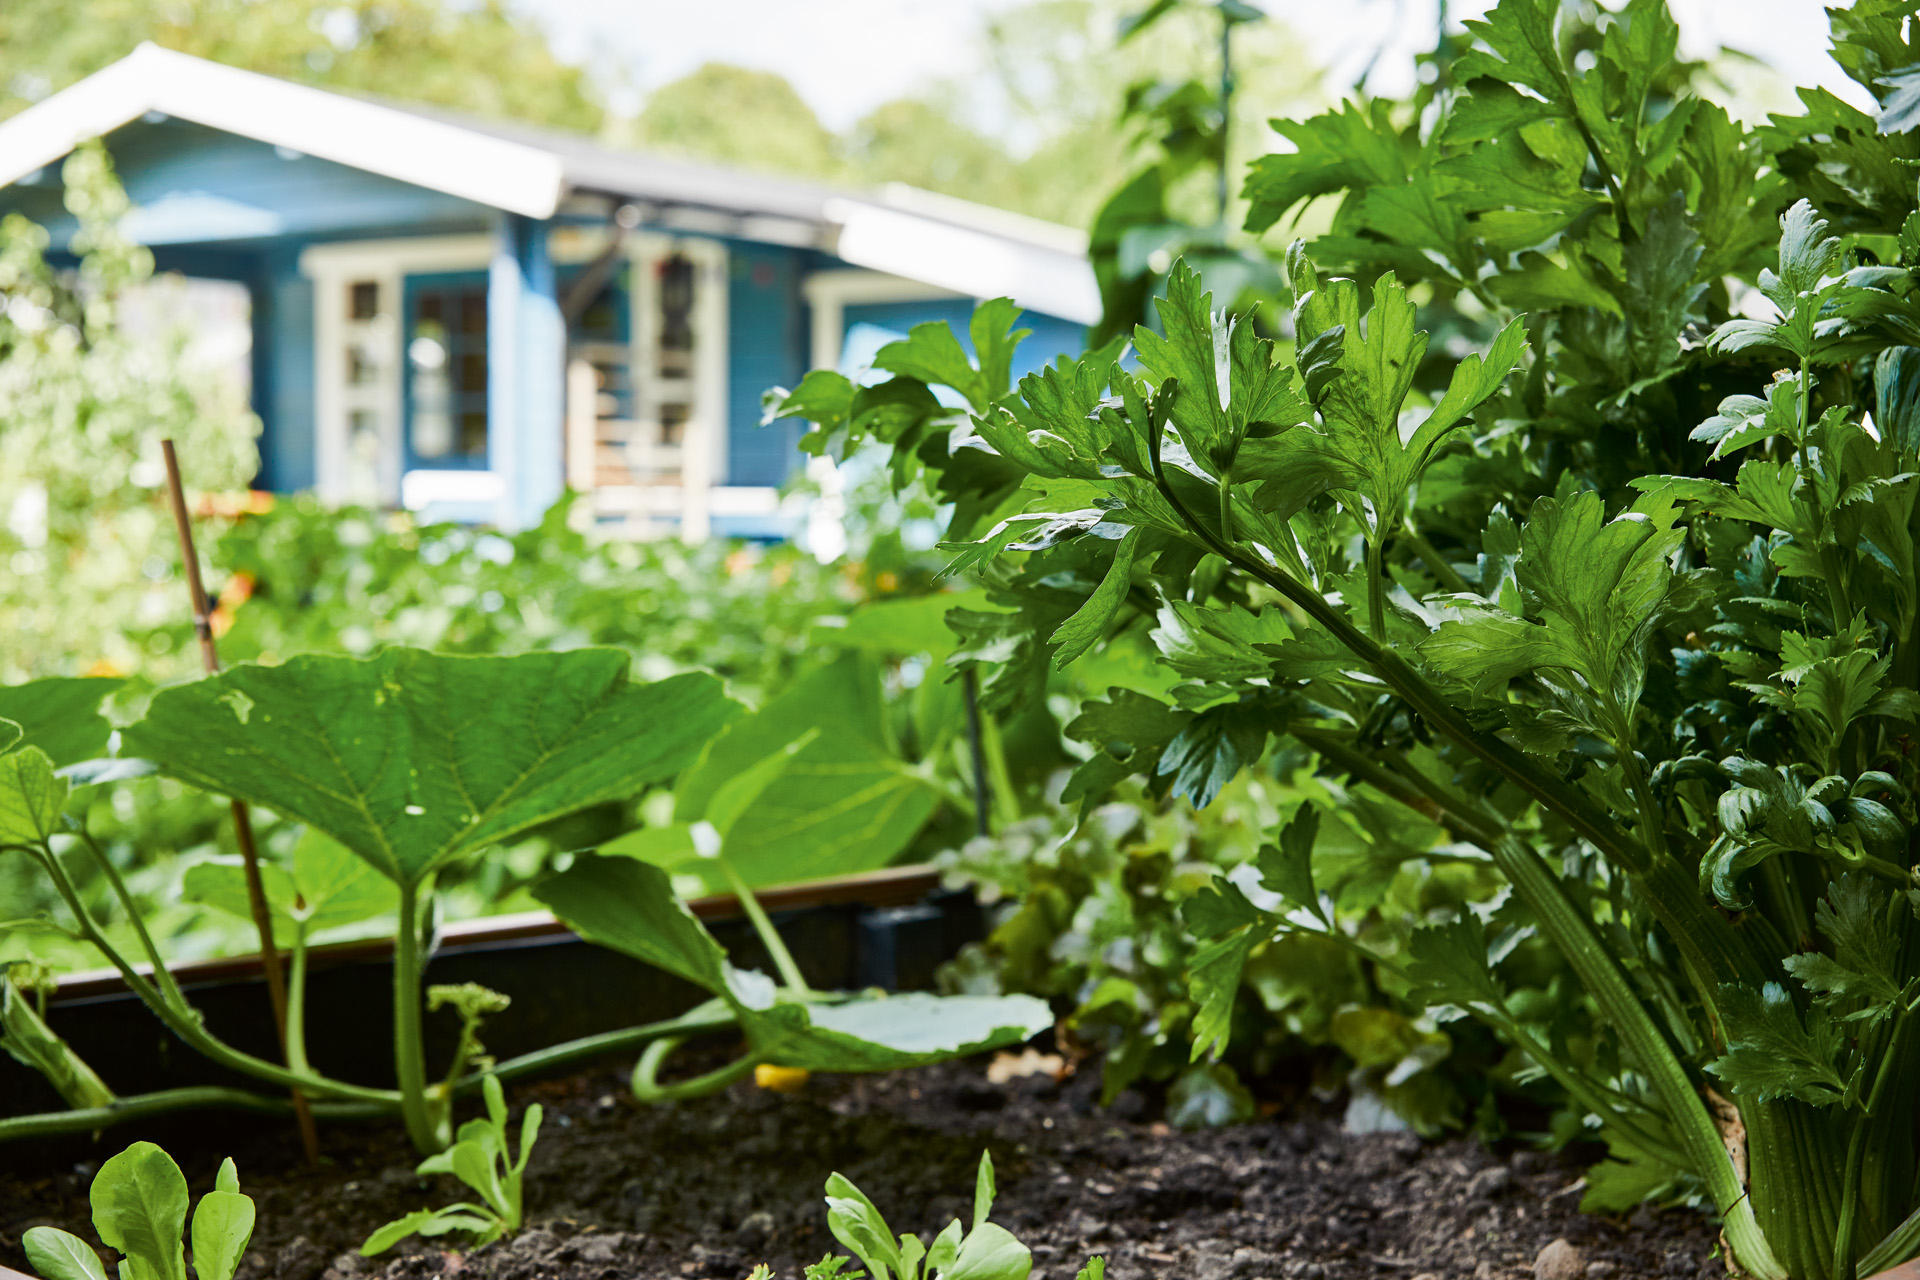 Close-up of a vegetable patch in a garden in front of a blue house